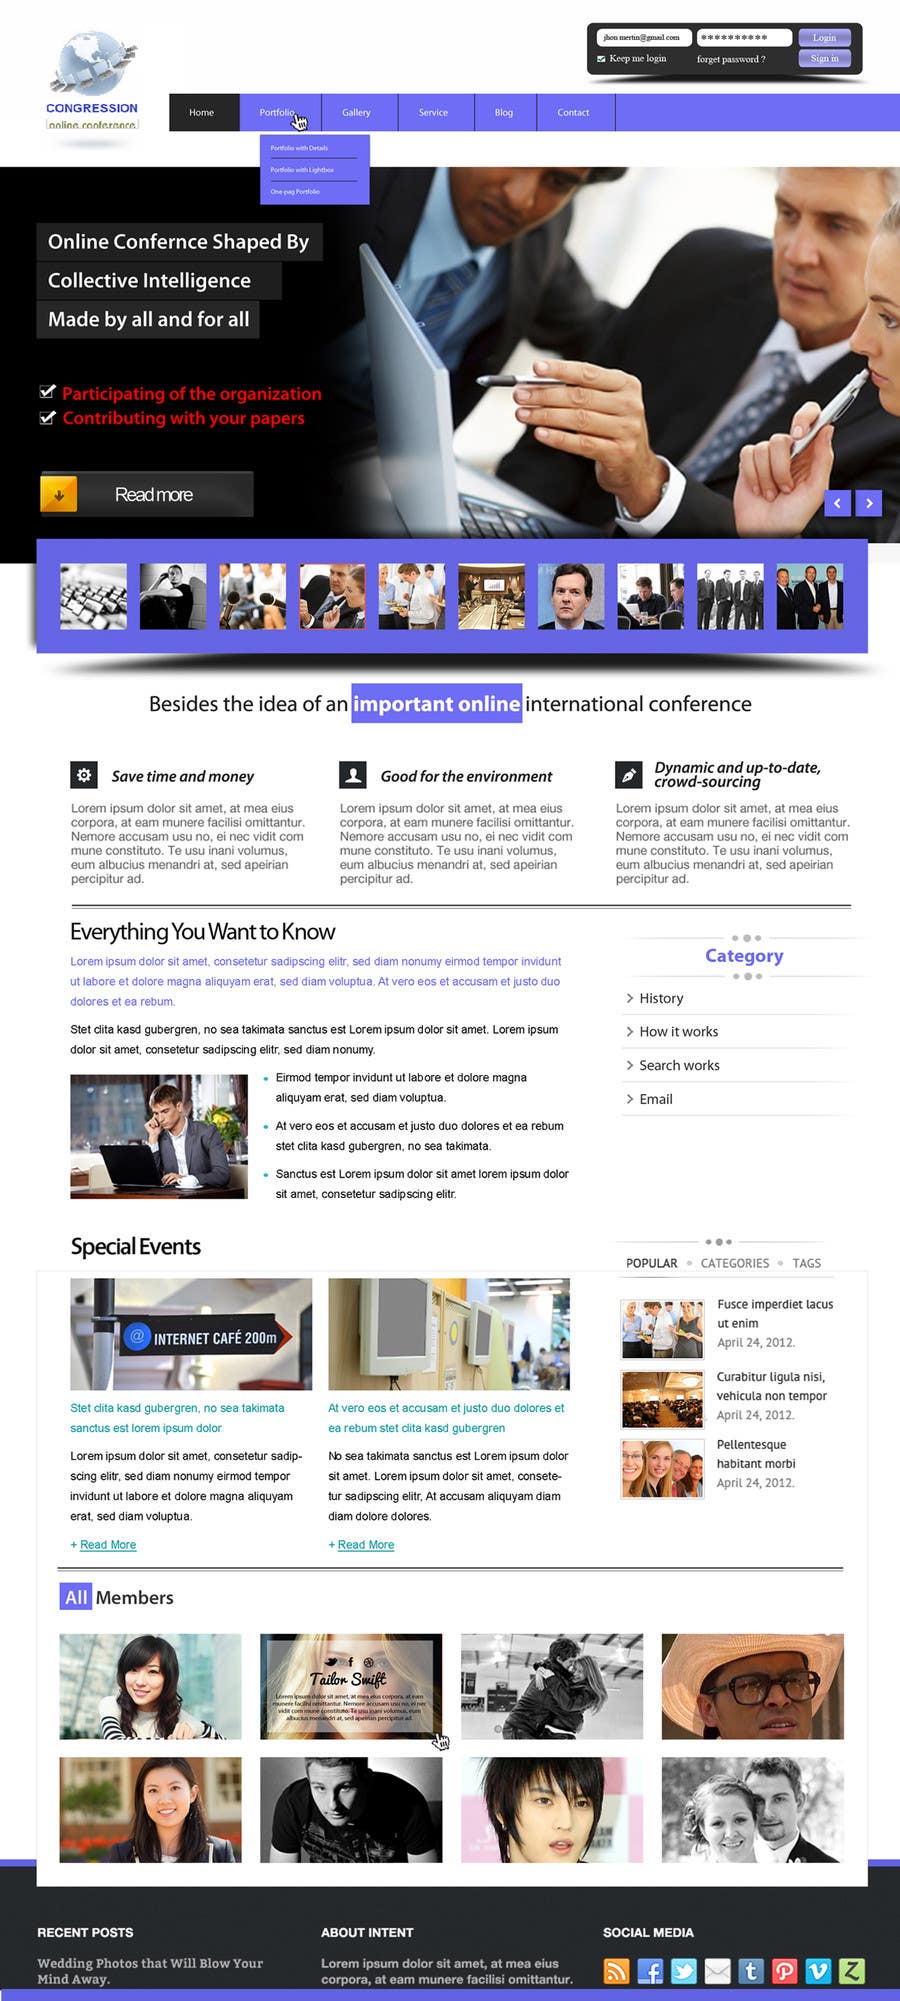 Proposition n°4 du concours                                                 New Home page for a website
                                            